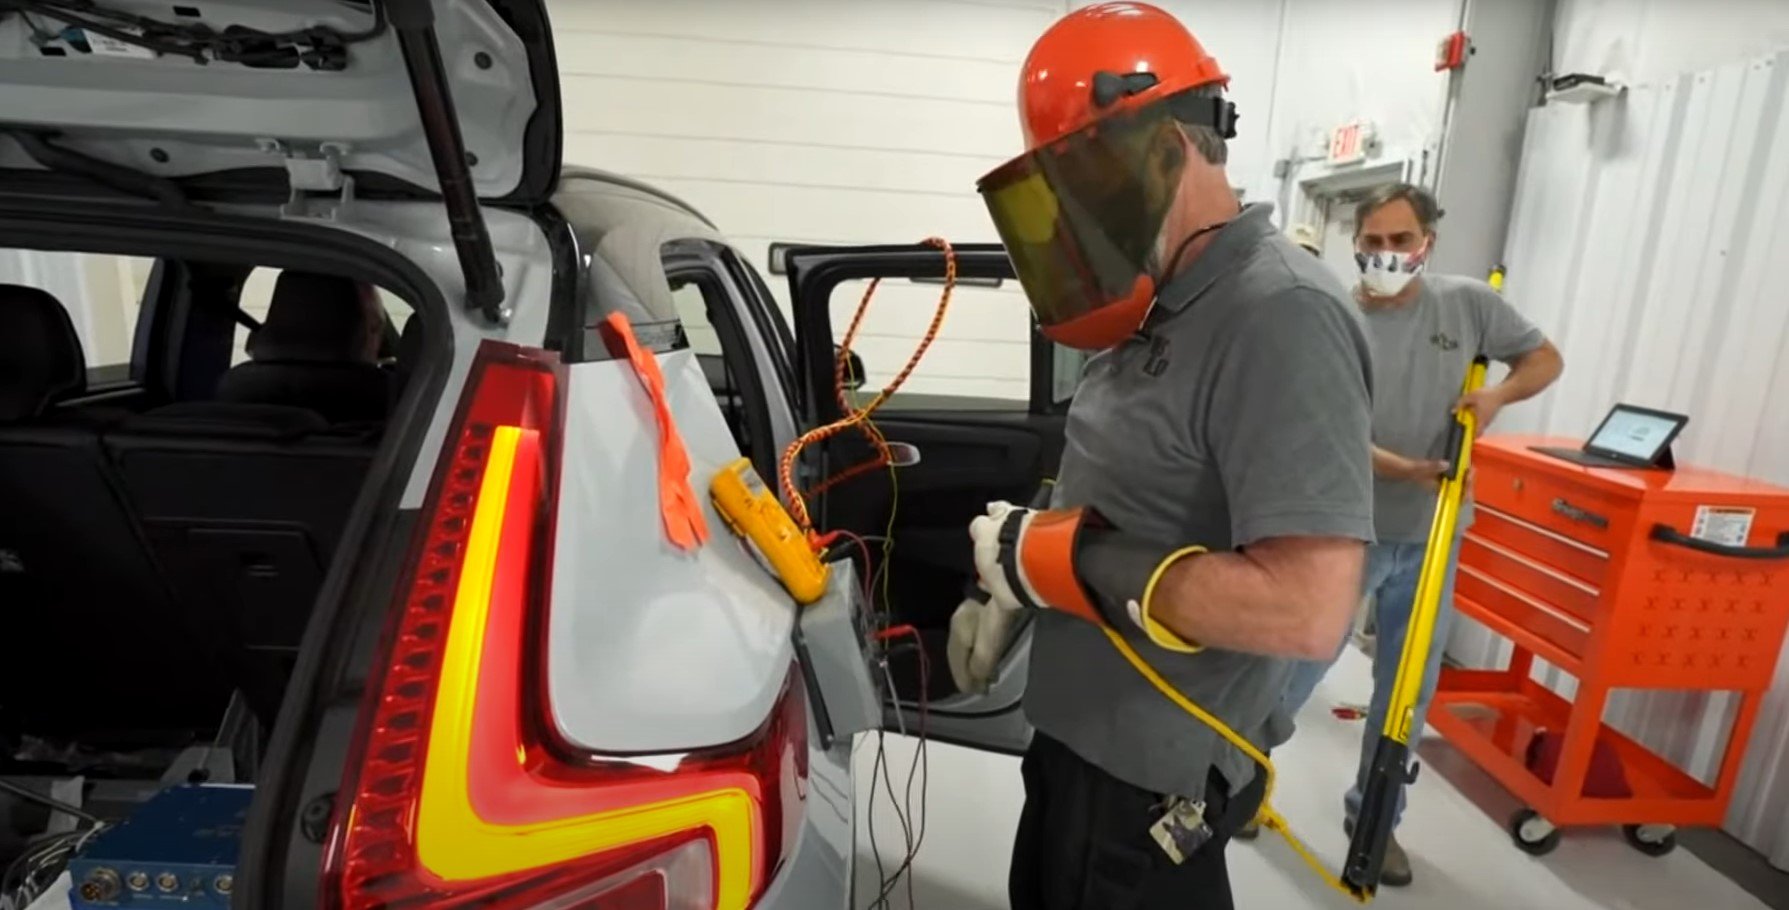 How electric vehicles are made safer from fire, electrocution | Fierce Electronics